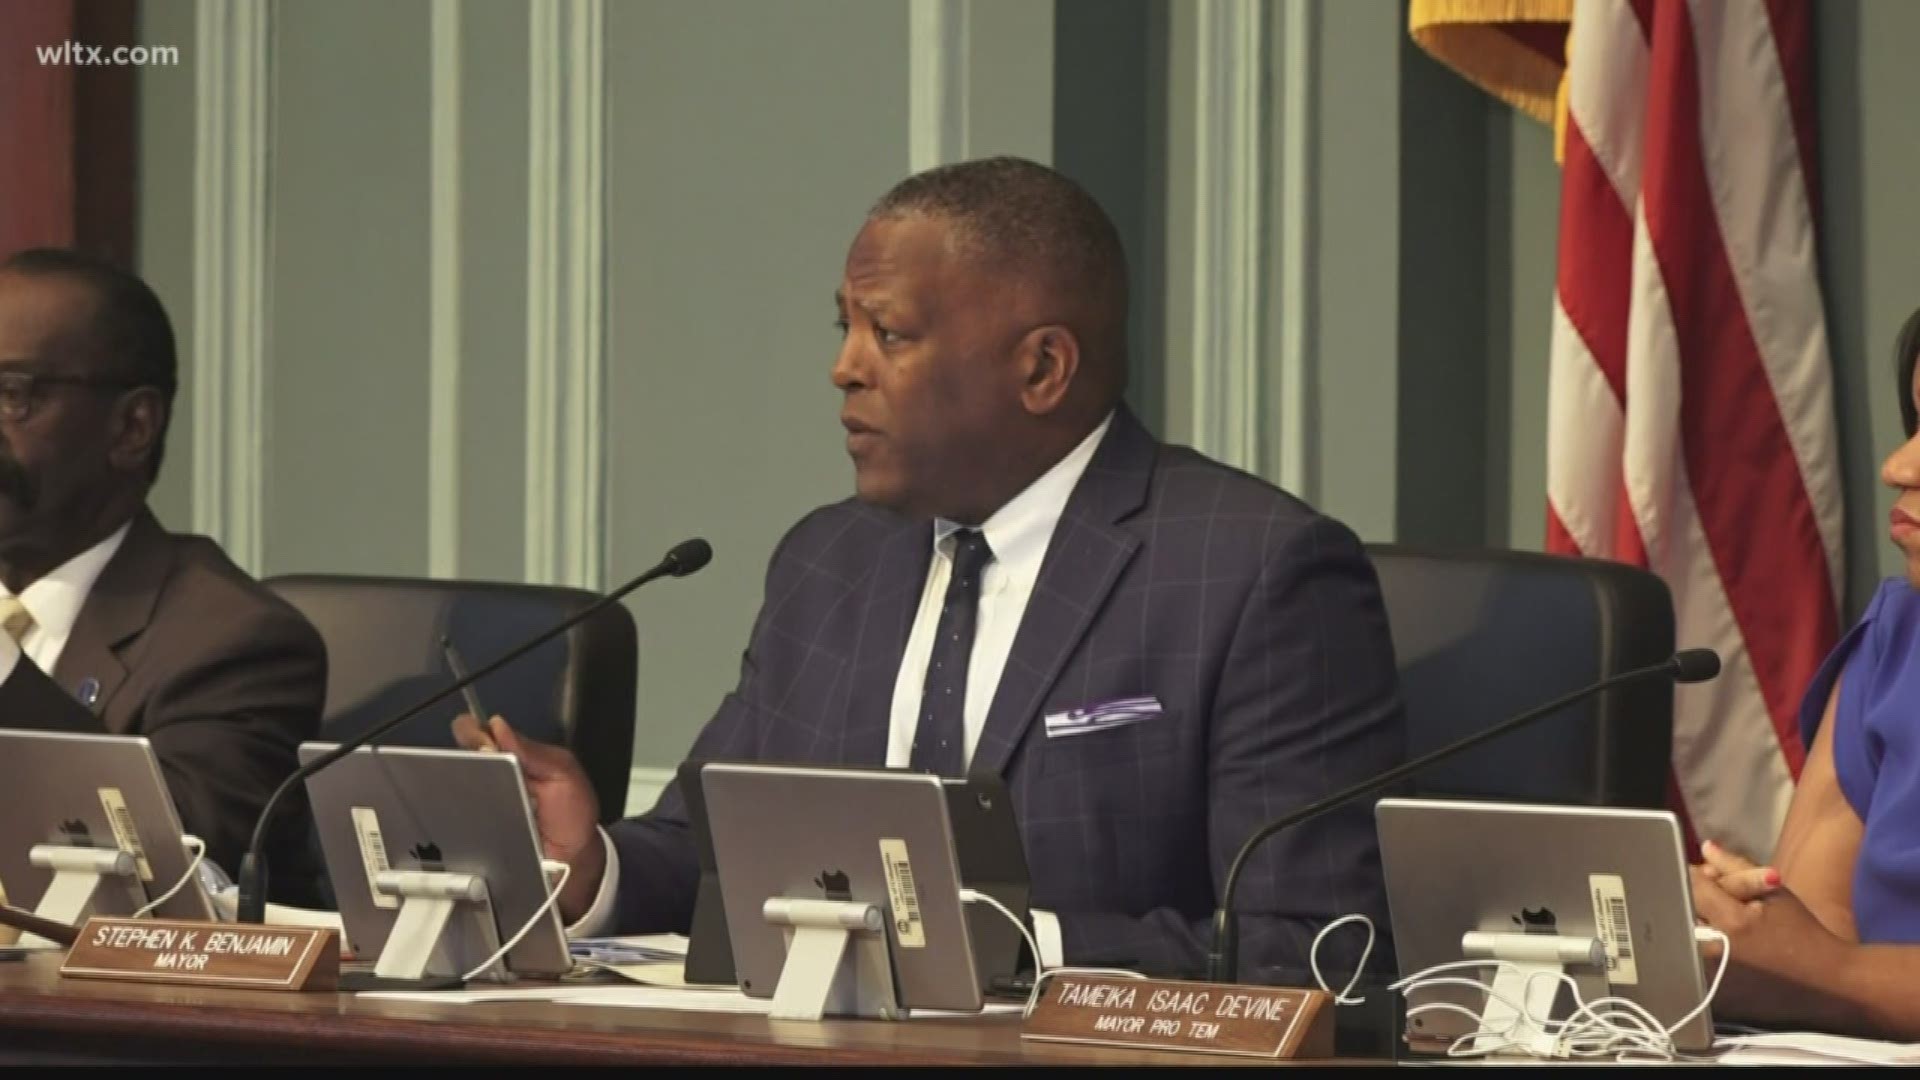 On Tuesday night, council unanimously passed the first reading of three ordinances. One is the Gun-Free School Zones ordinance, that prohibits people from possessing a firearm within 1000 feet of a public, private or parochial school in the city.